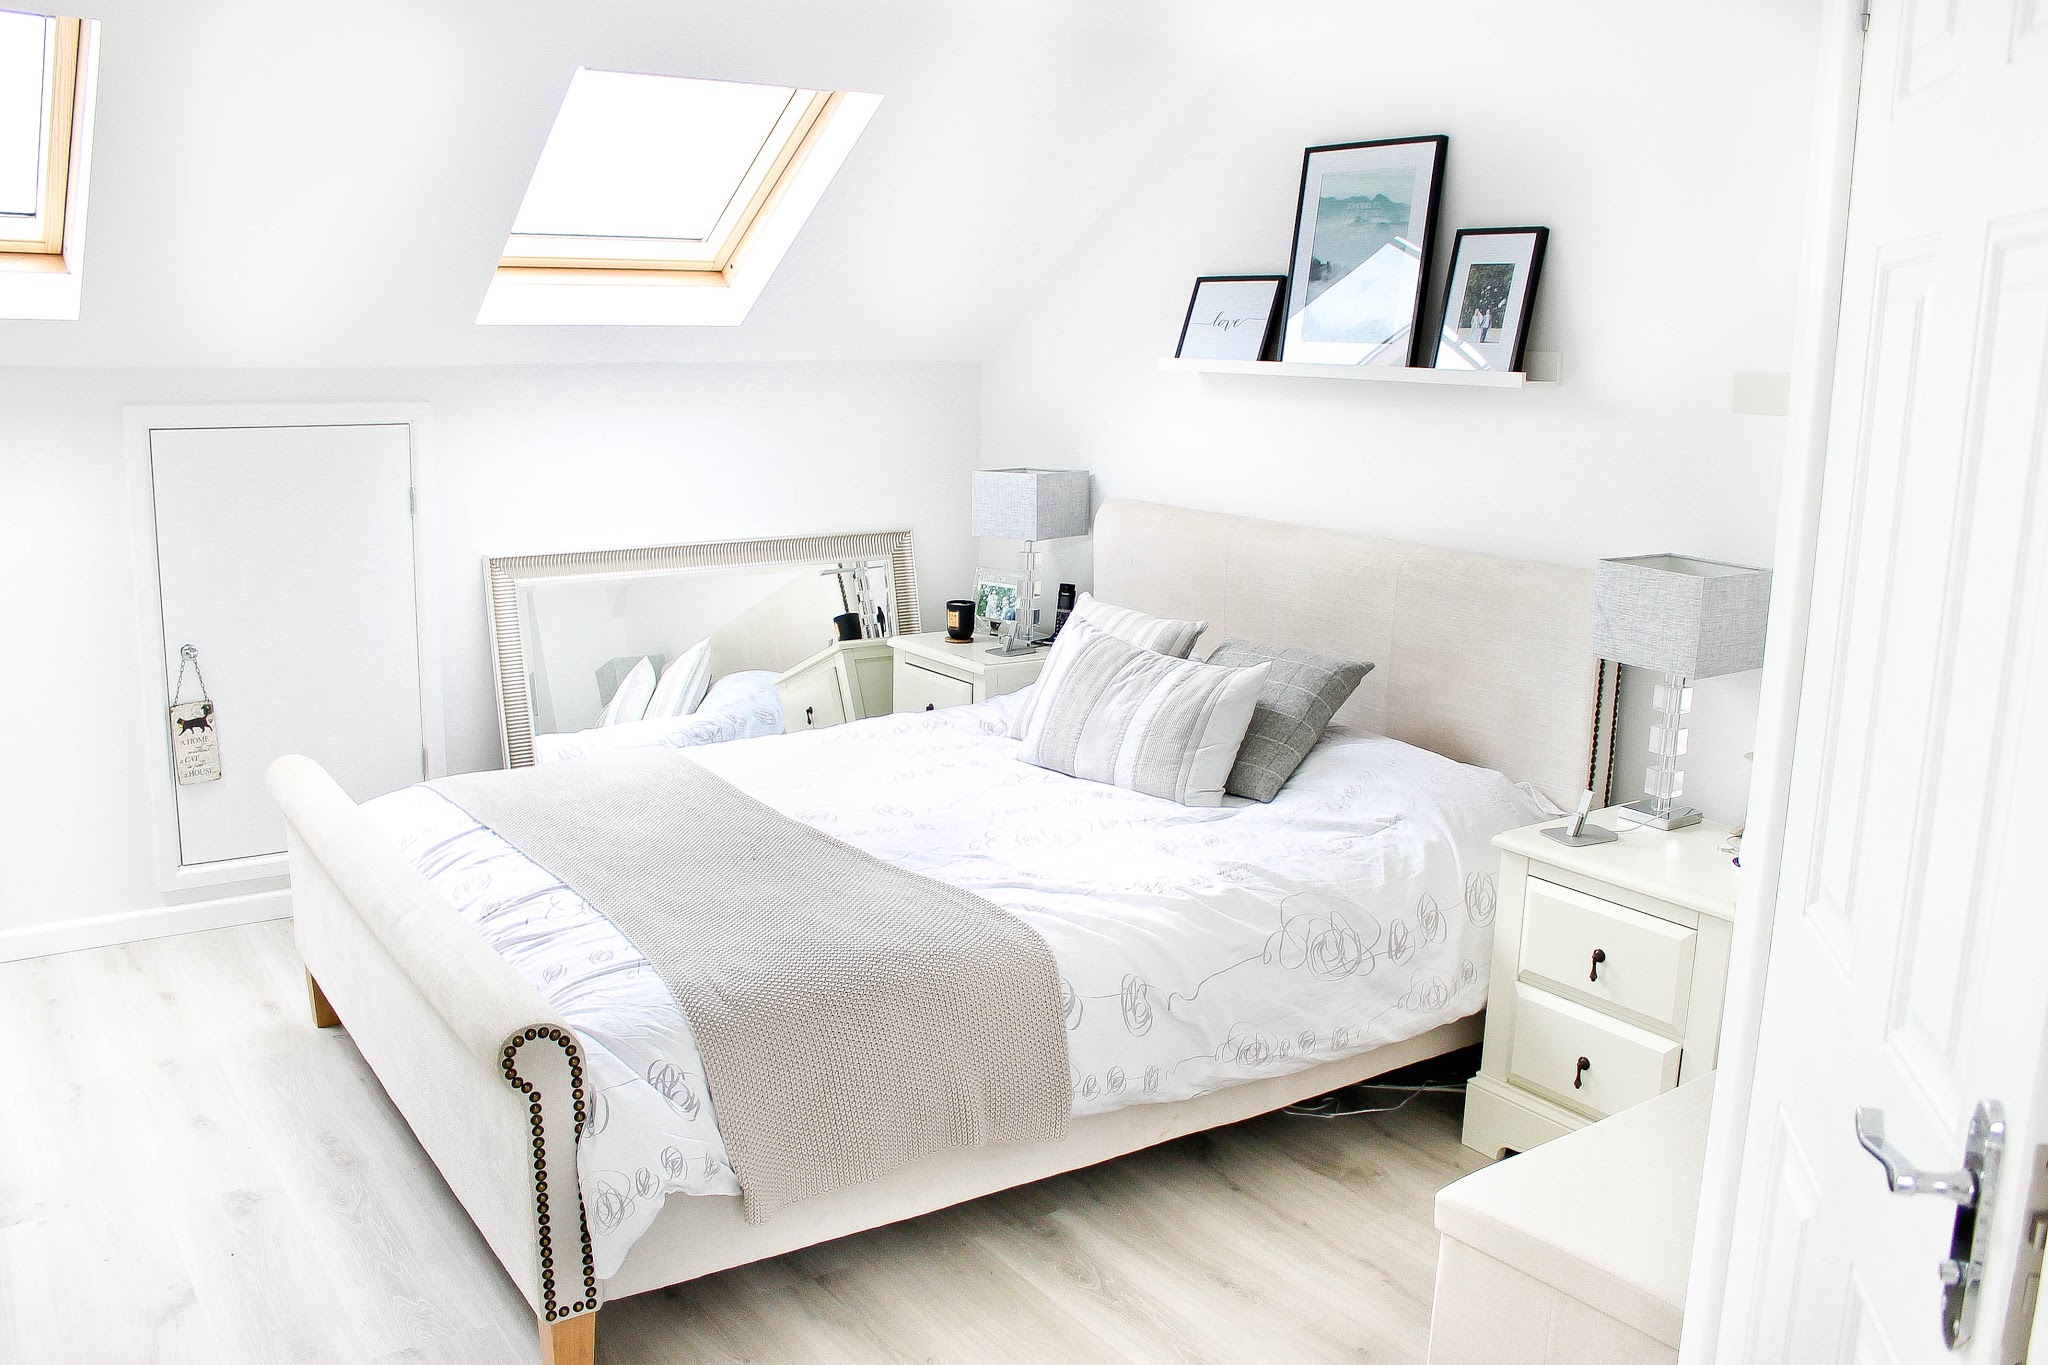 Our New Dormer Loft Conversion and Ensuite, dormer loft, loft conversion, dormer loft conversion cost, dormer loft conversion ideas, dormer attic conversion, types of loft conversion